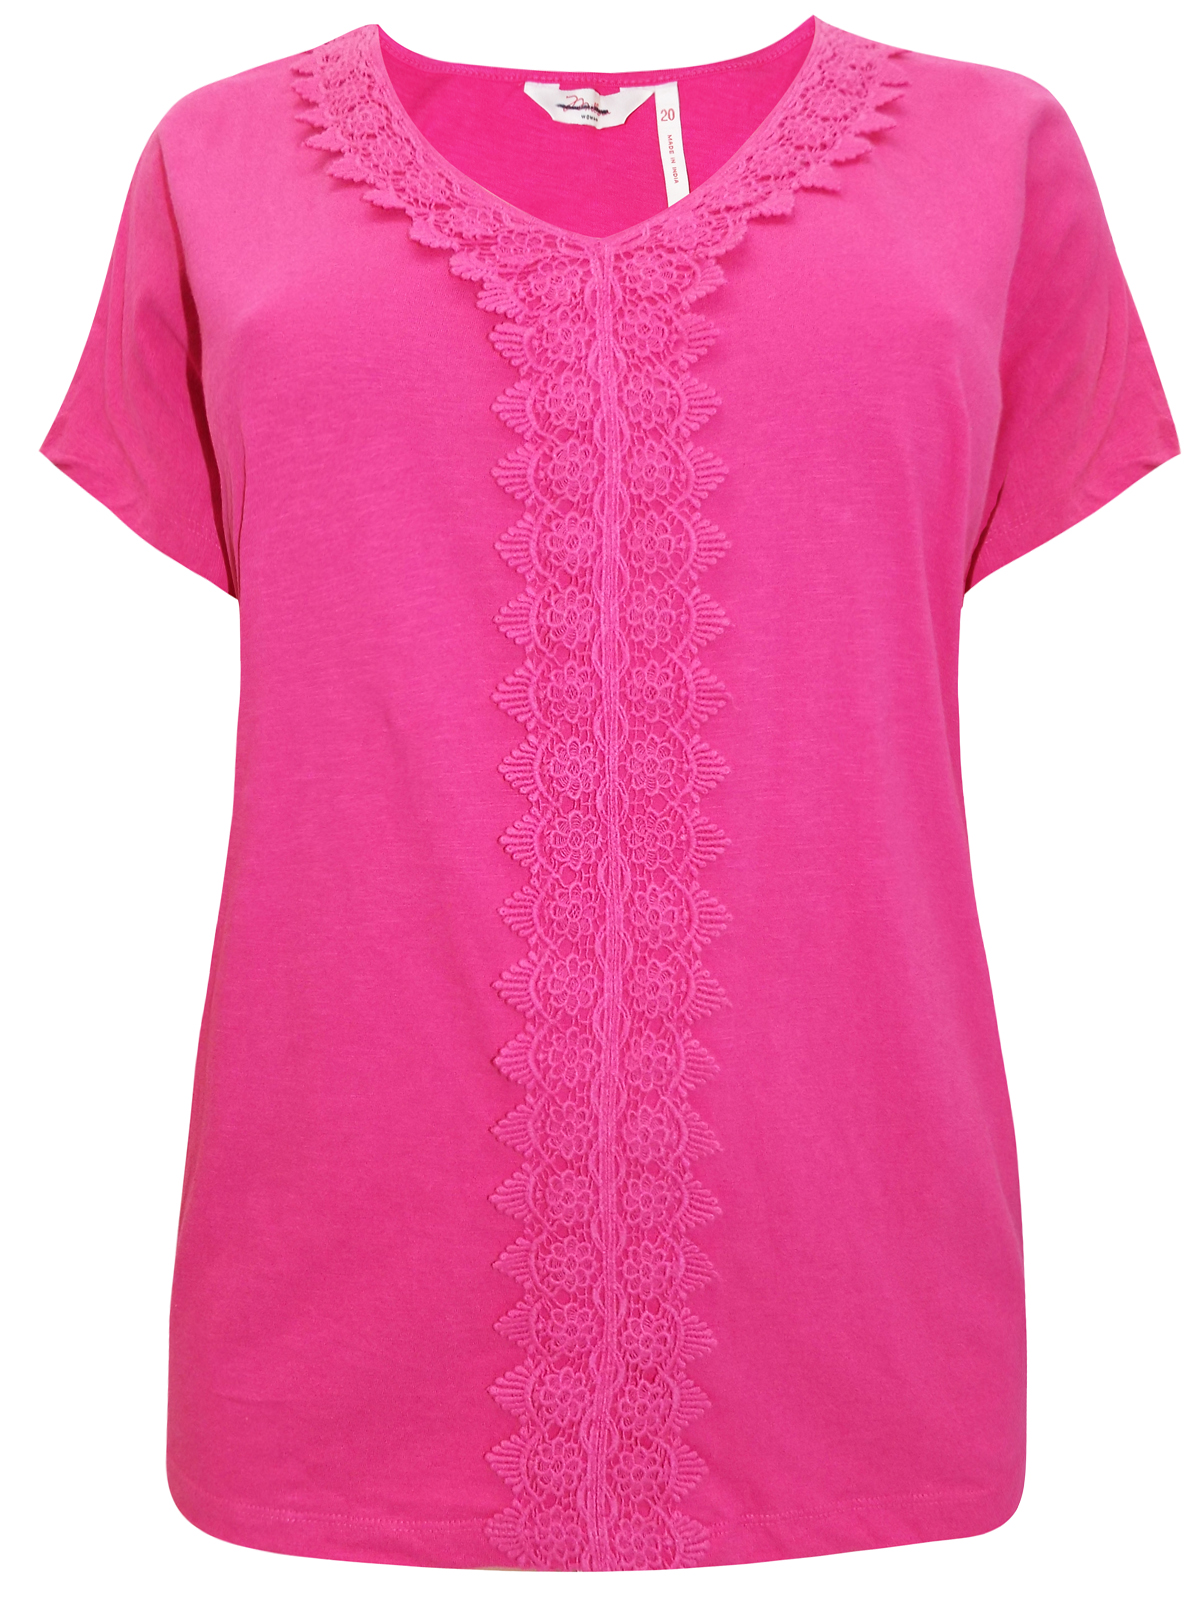 Wholesale Ladies Clothing by Millers from Australia - - Millers PINK ...